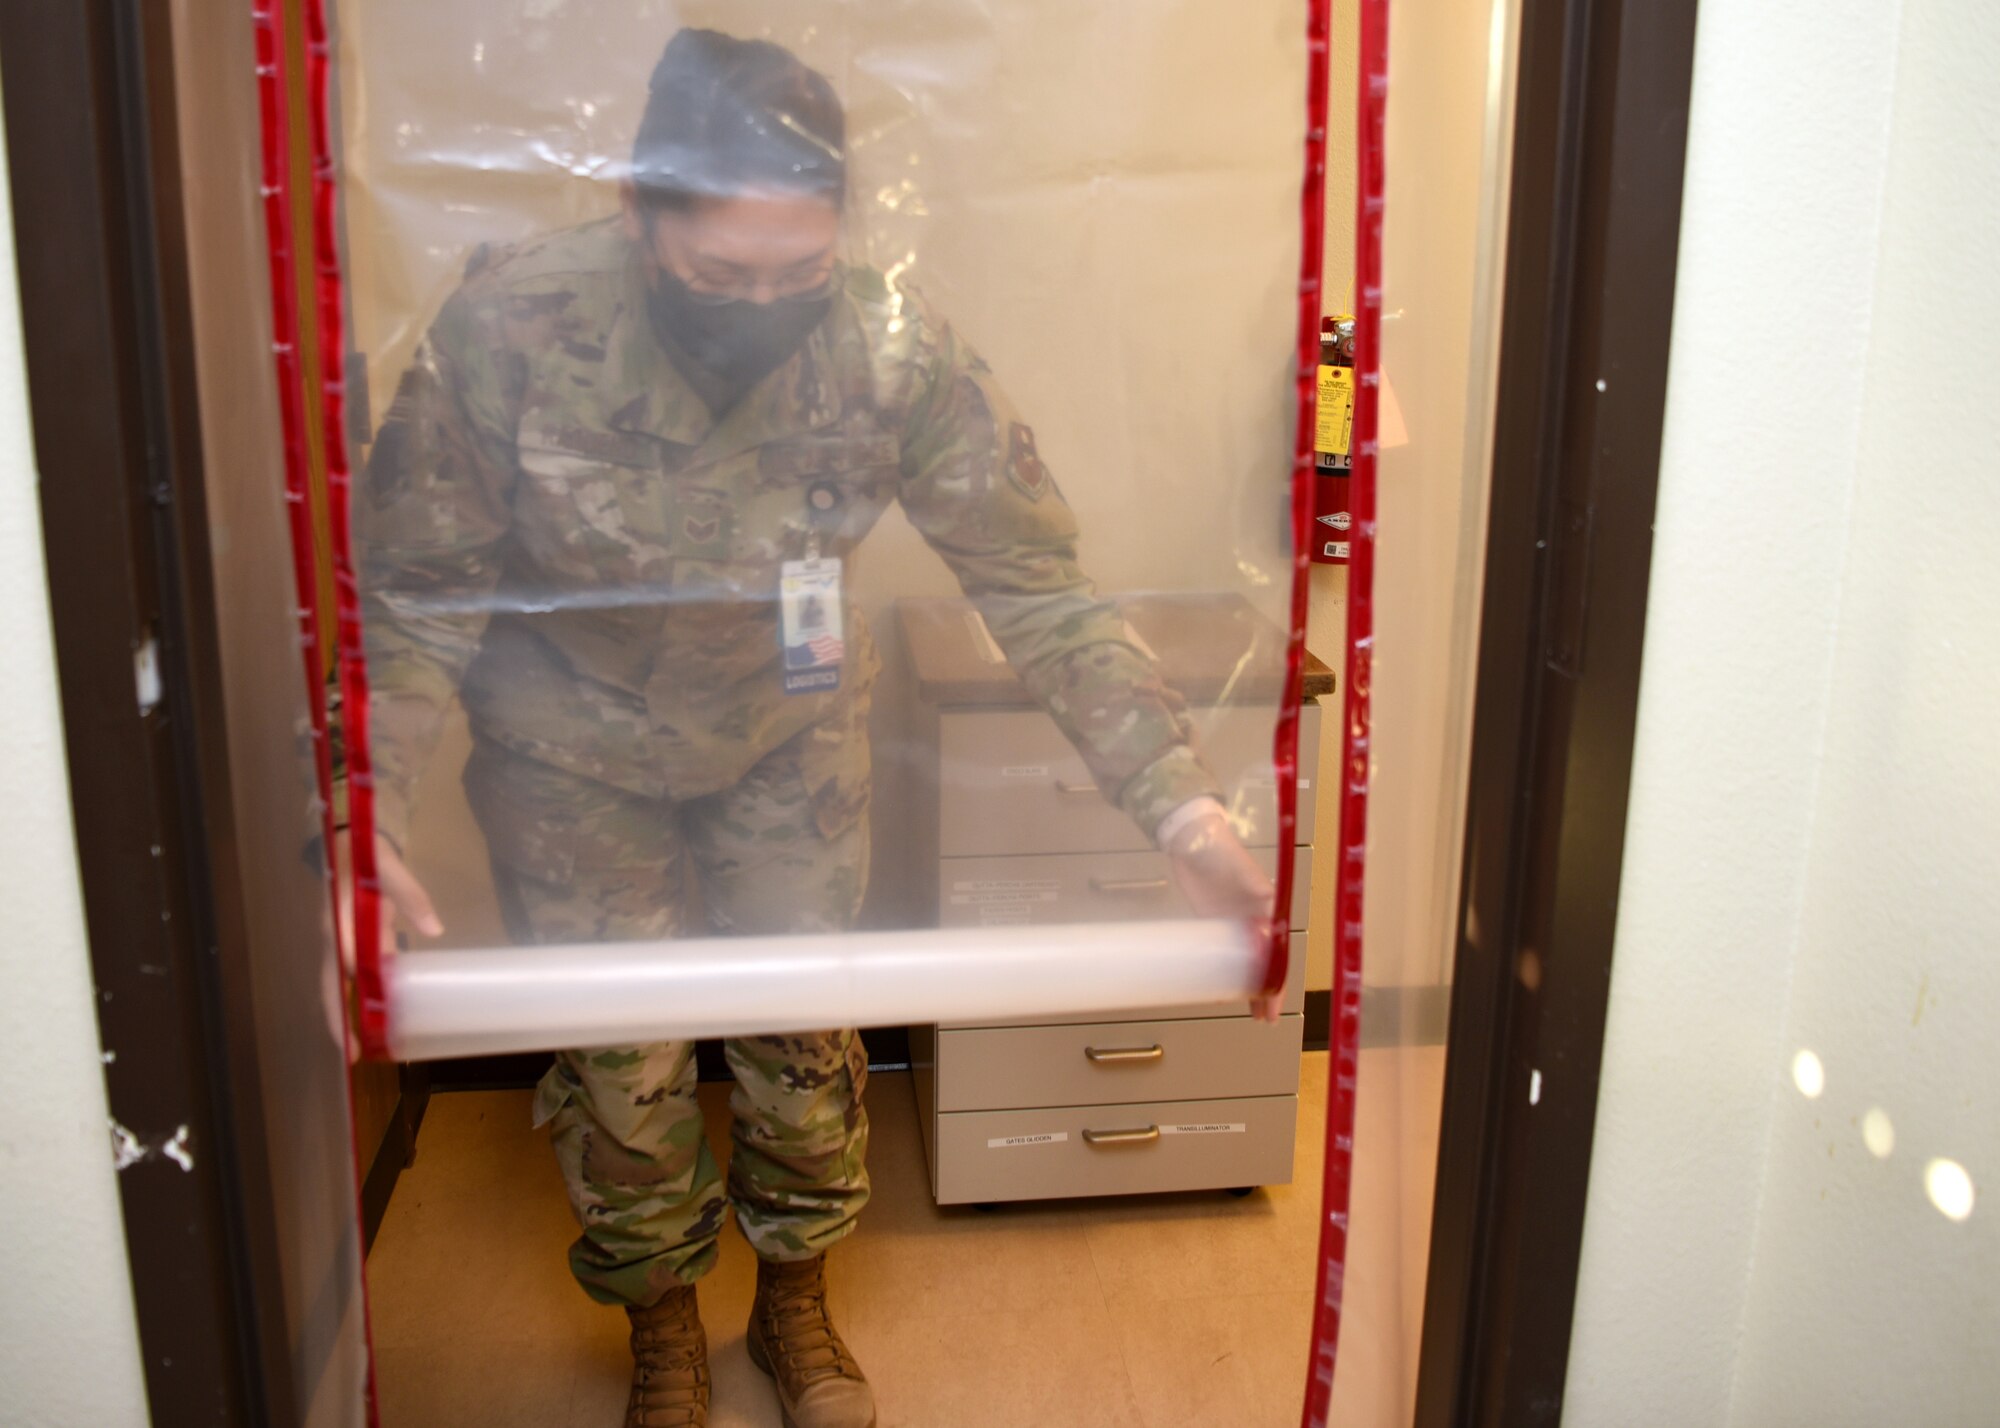 U.S. Air Force Staff Sgt. Sydney Raqueno, 17th Operations Medical Readiness Squadron, dental logistics NCO in charge, pulls down a plastic doorway barrier at the Ross Clinic’s dental facility, on Goodfellow Air Force Base, Texas, Aug. 5, 2020.  Raqueno led a team of Airmen to install the COVID-19 prevention upgrade barriers and completed the task in one duty day. (U.S. Air Force photo by Airman 1st Class Abbey Rieves)